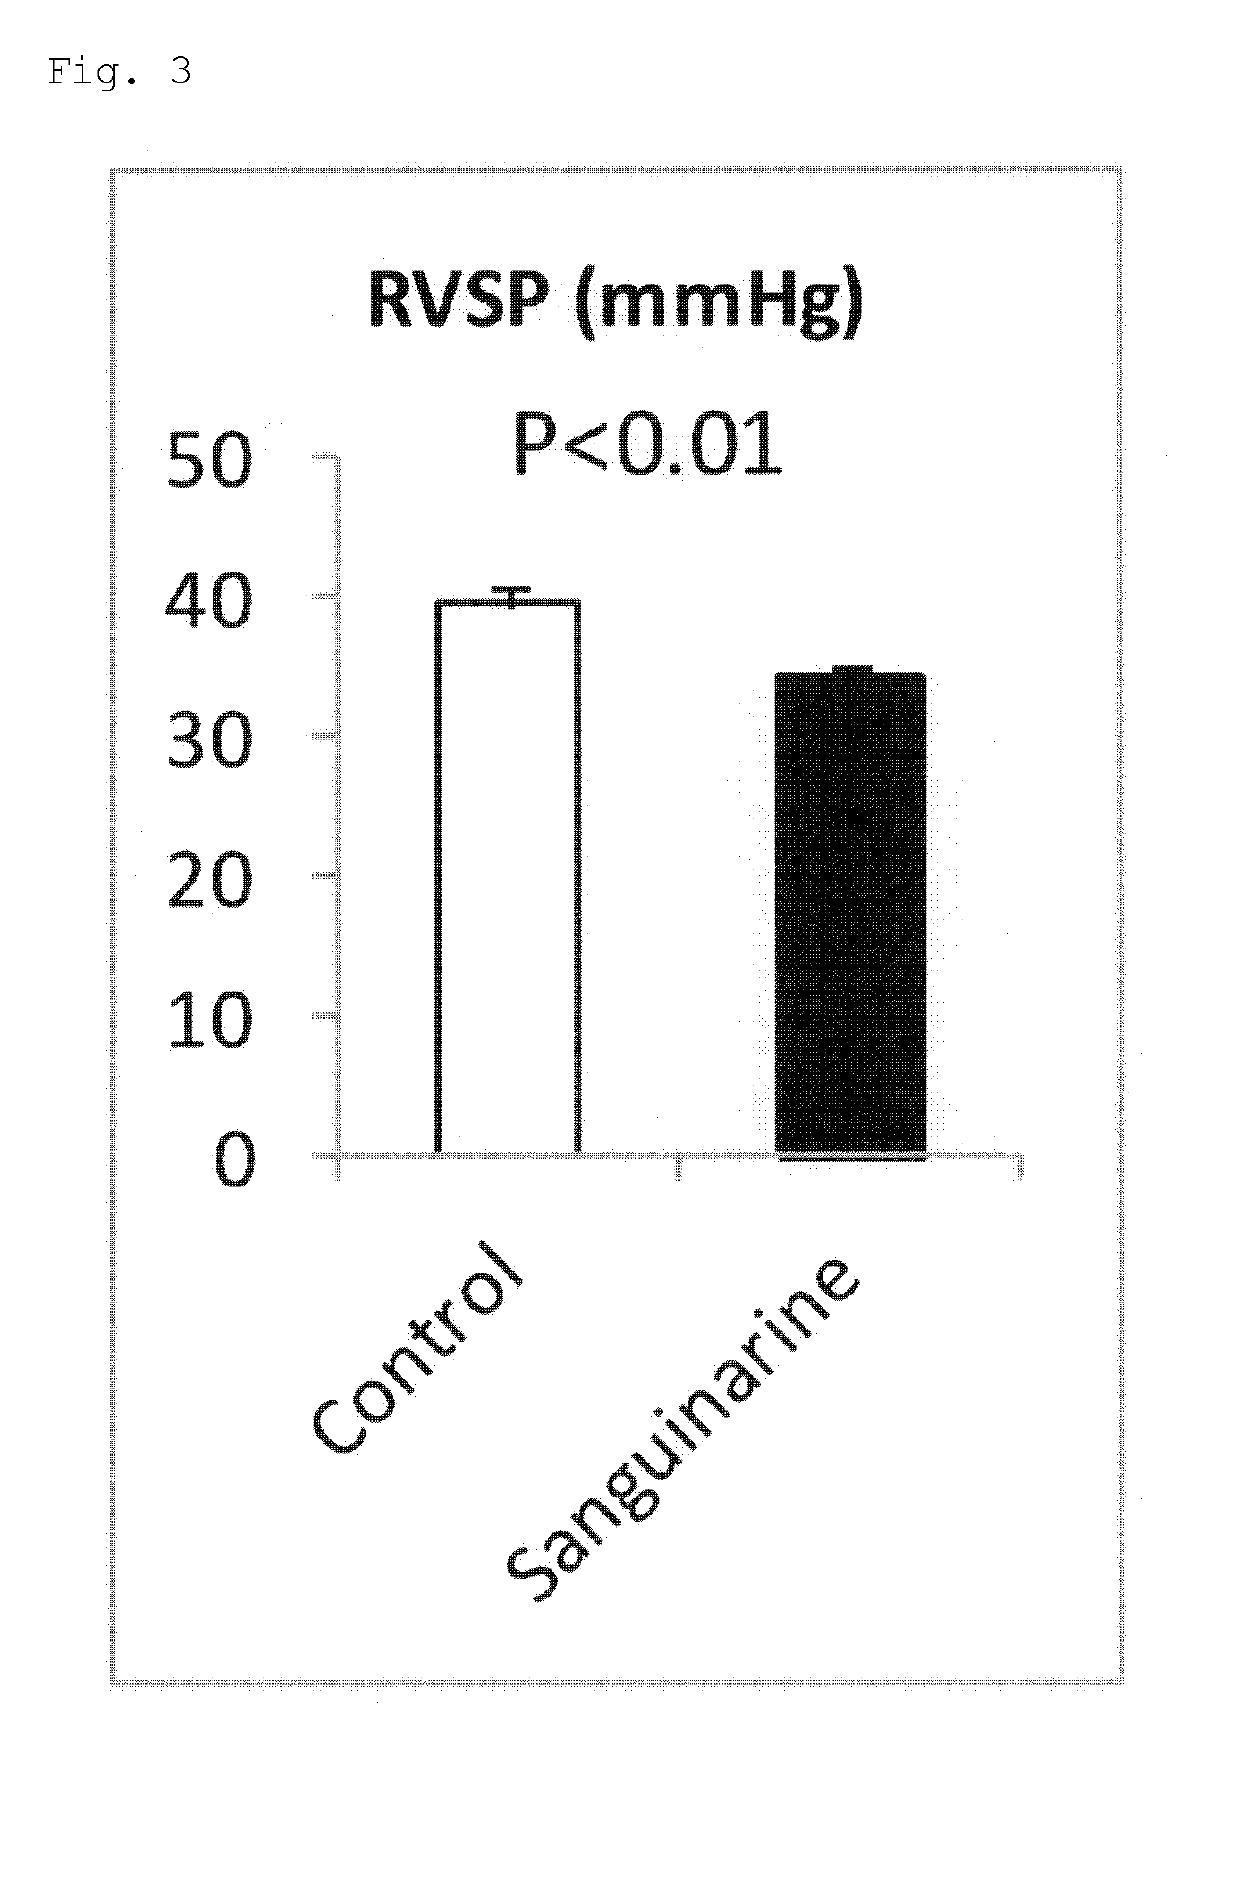 Pulmonary hypertension preventative or therapeutic agent containing component exhibiting selenoprotein p activity-inhibiting effect